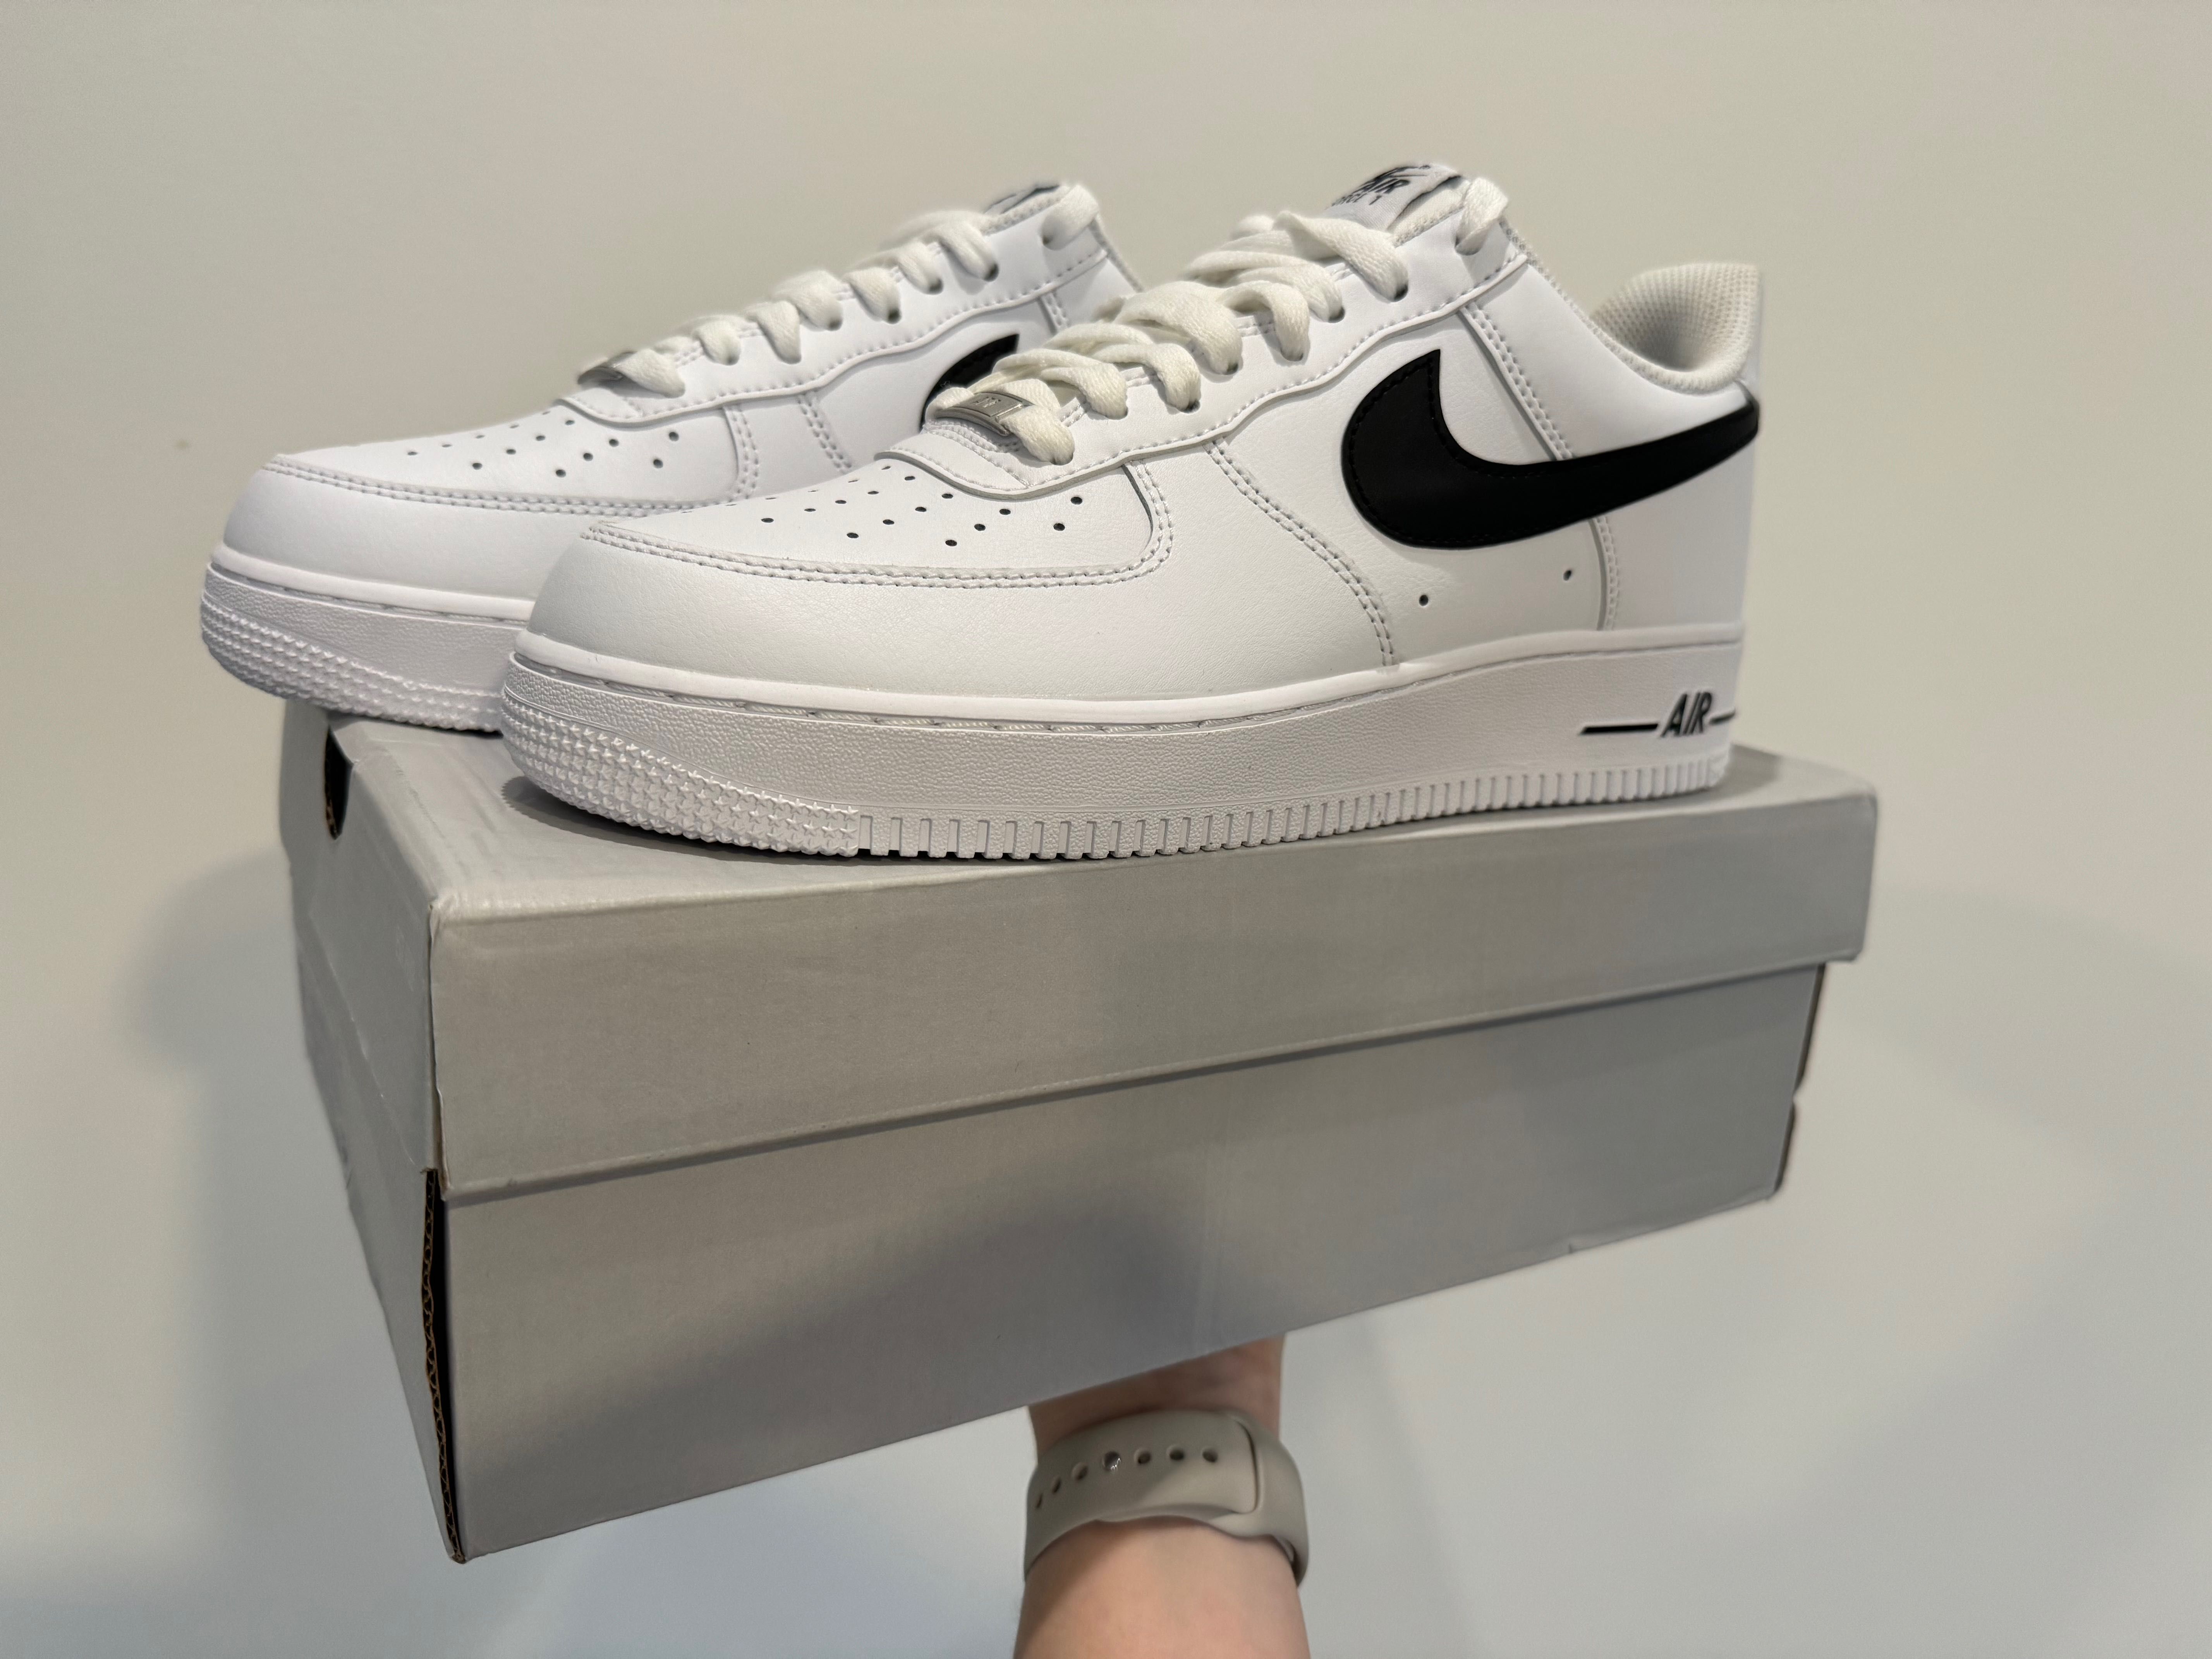 Buty Nike Air Force 1 Low '07 White Black r. 43